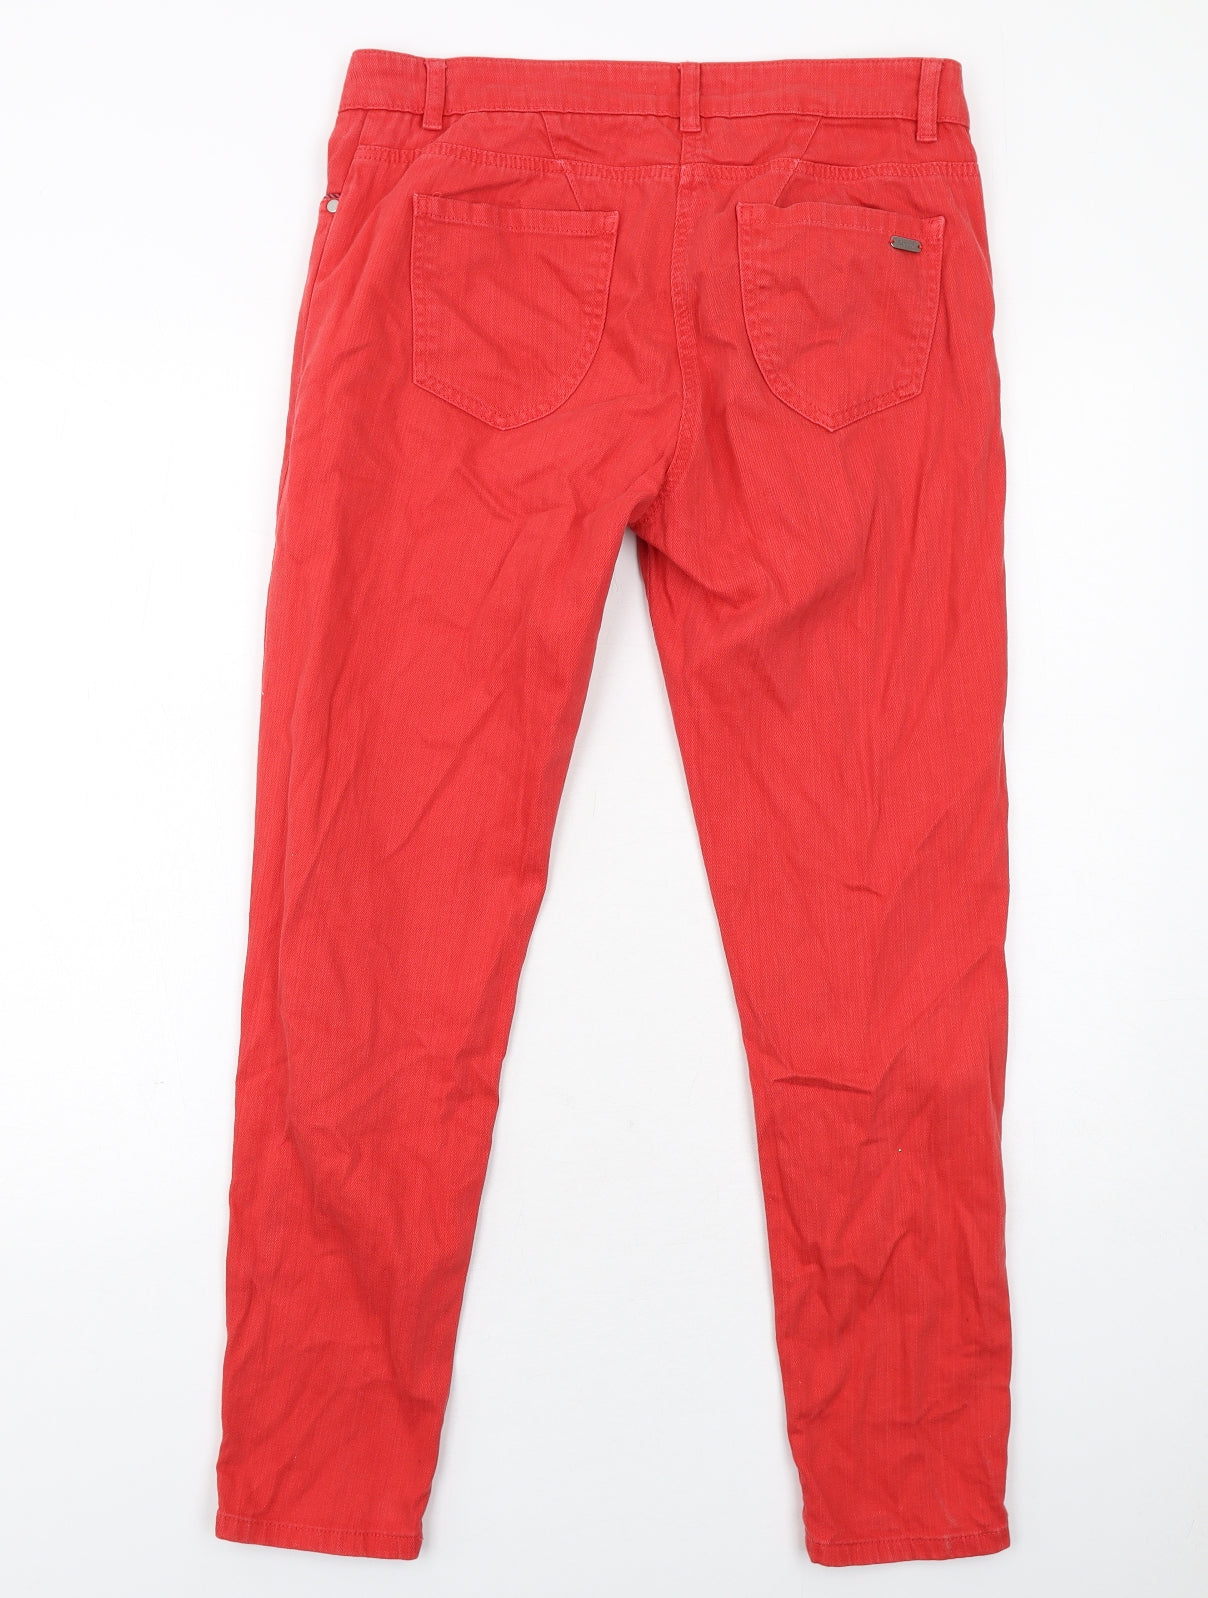 Barbour Womens Red Cotton Skinny Jeans Size 14 Regular Zip